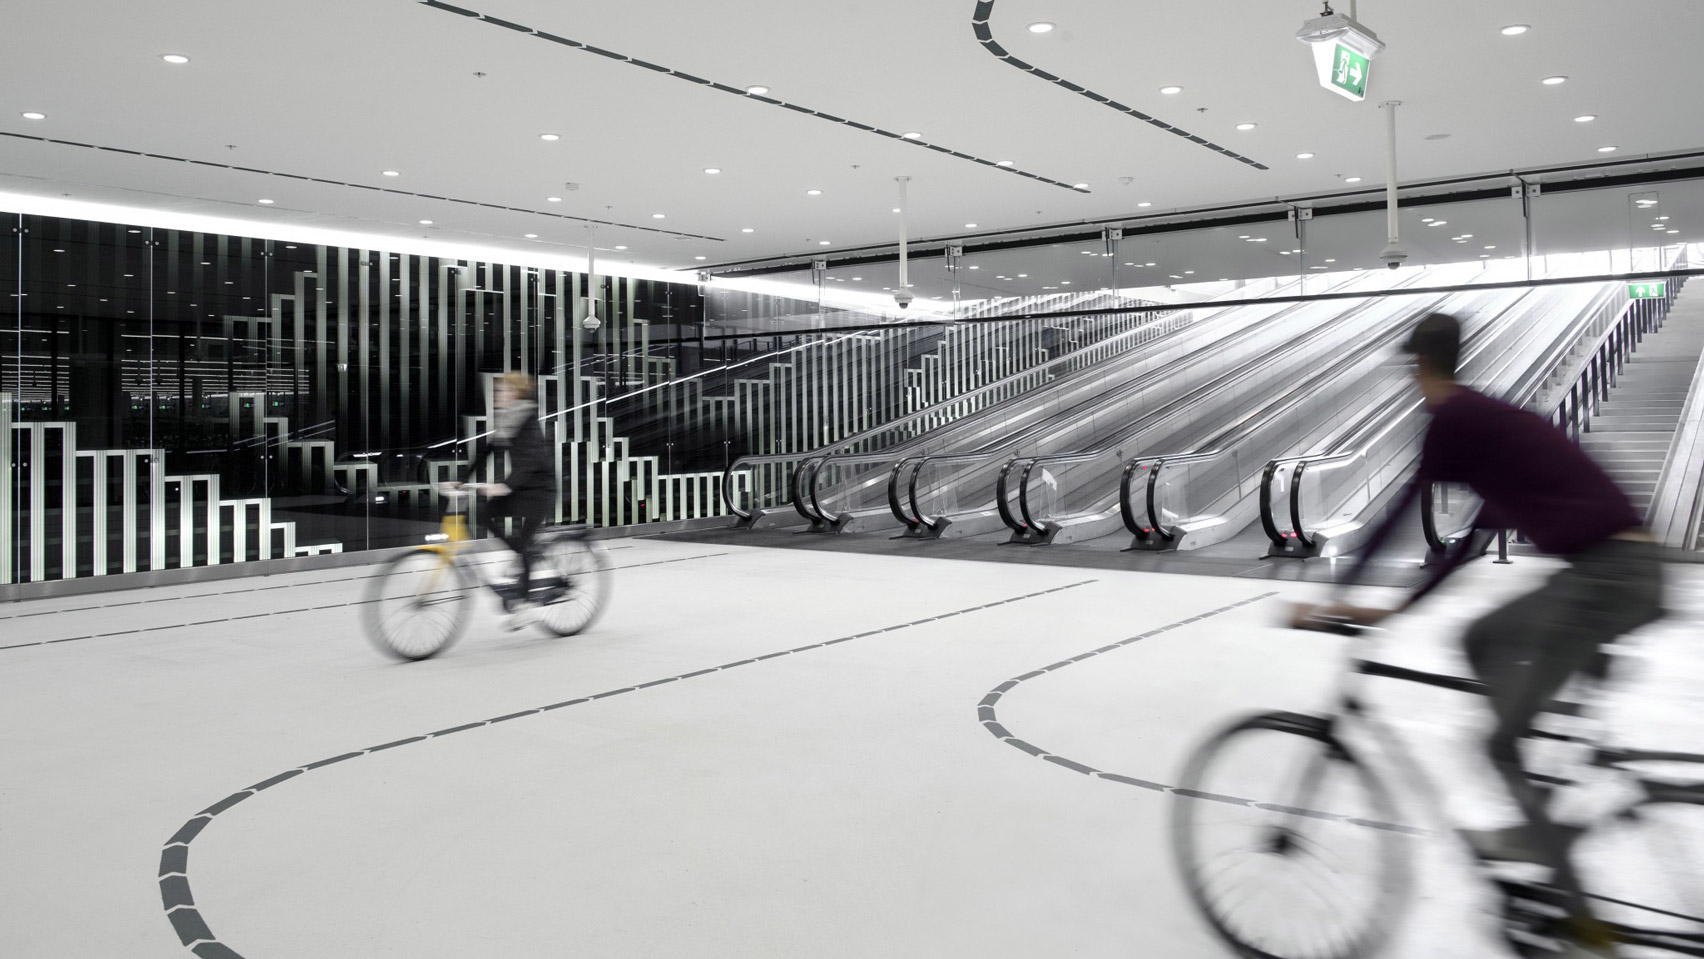 Bicycle Garage The Hague provides 8,000 cyclists with storage space